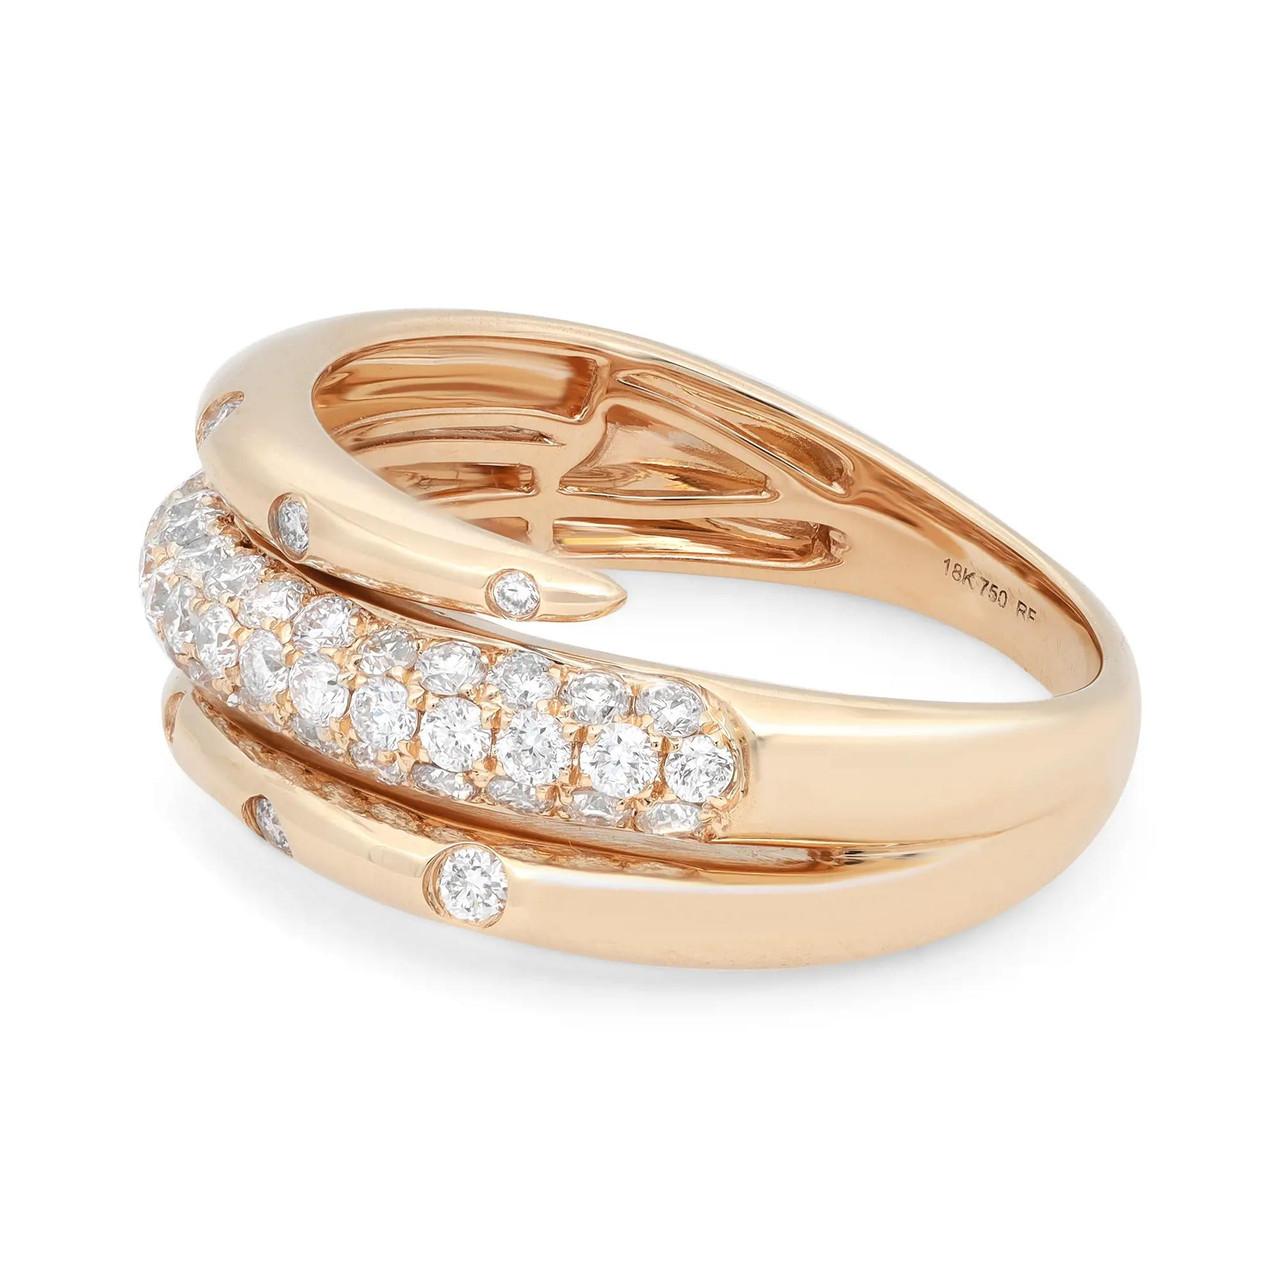 Introducing our stunning 0.78 Carat Diamond Spiral Ring in 18K Yellow Gold. This exquisite piece showcases a captivating spiral design crafted in 18K rose gold, adorned with a sparkling pavé of diamonds at the face. The combination of the intricate